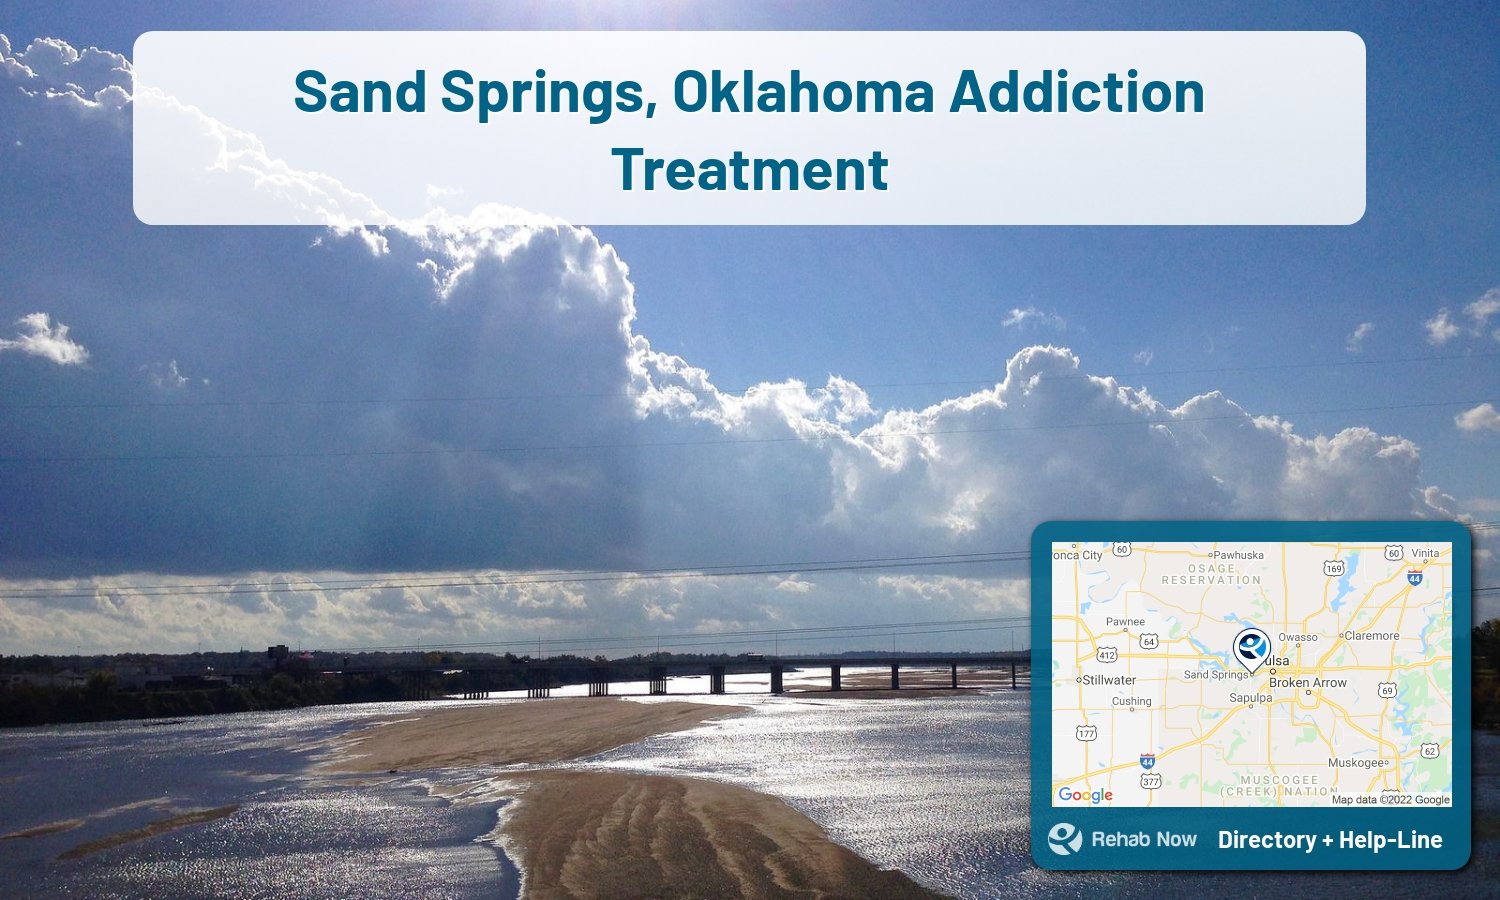 Sand Springs, OK Treatment Centers. Find drug rehab in Sand Springs, Oklahoma, or detox and treatment programs. Get the right help now!